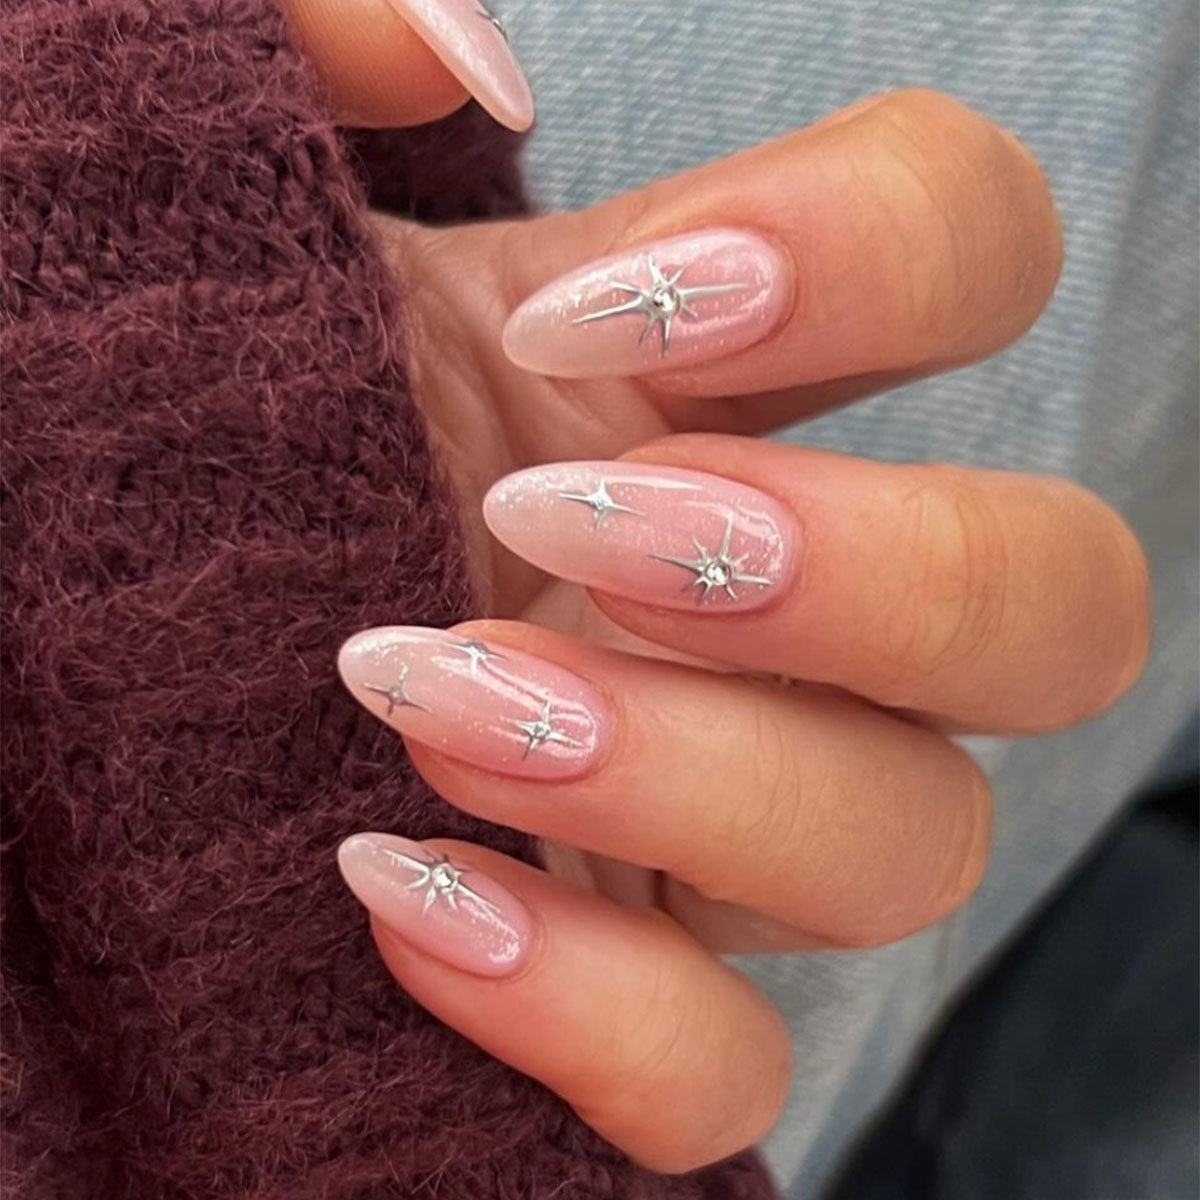 Pearls Glued On Fingers Is the Latest Instagram Nail Art